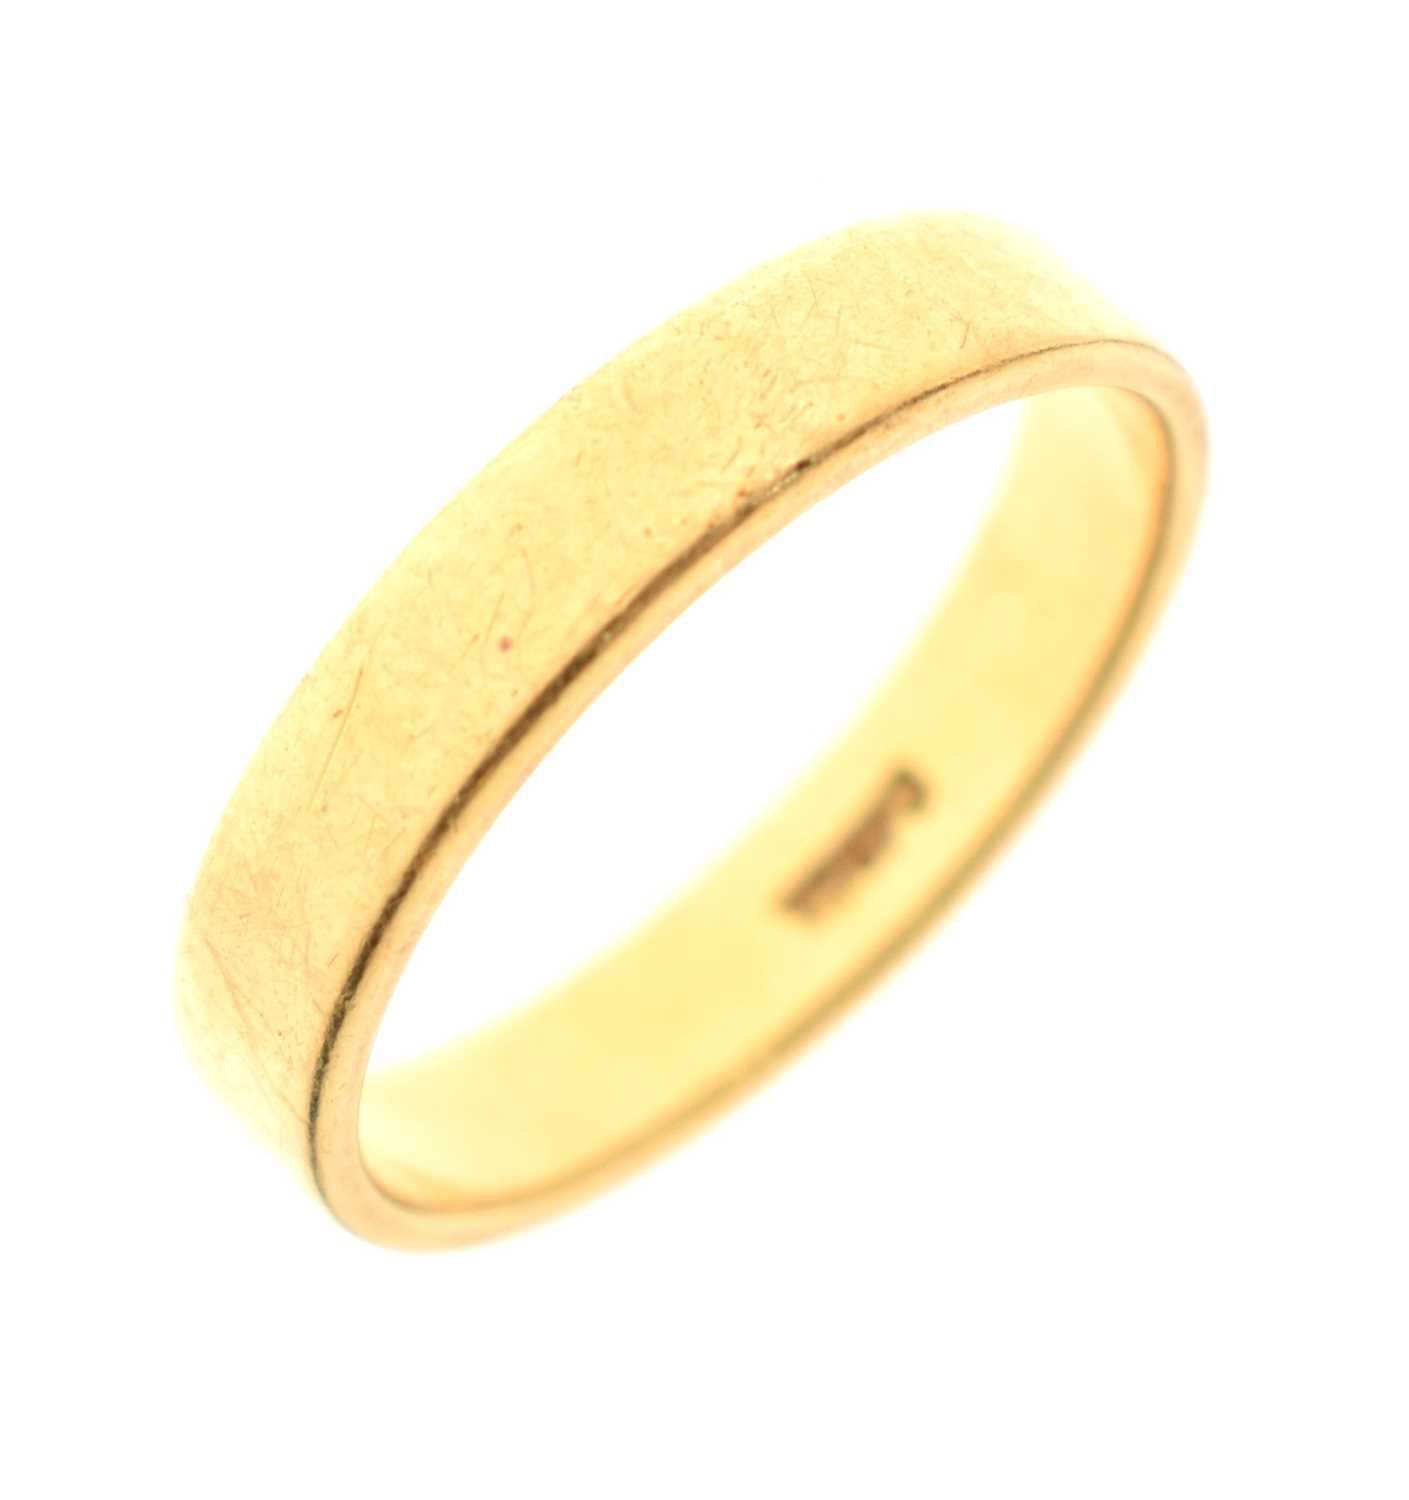 Wedding band of flat section design